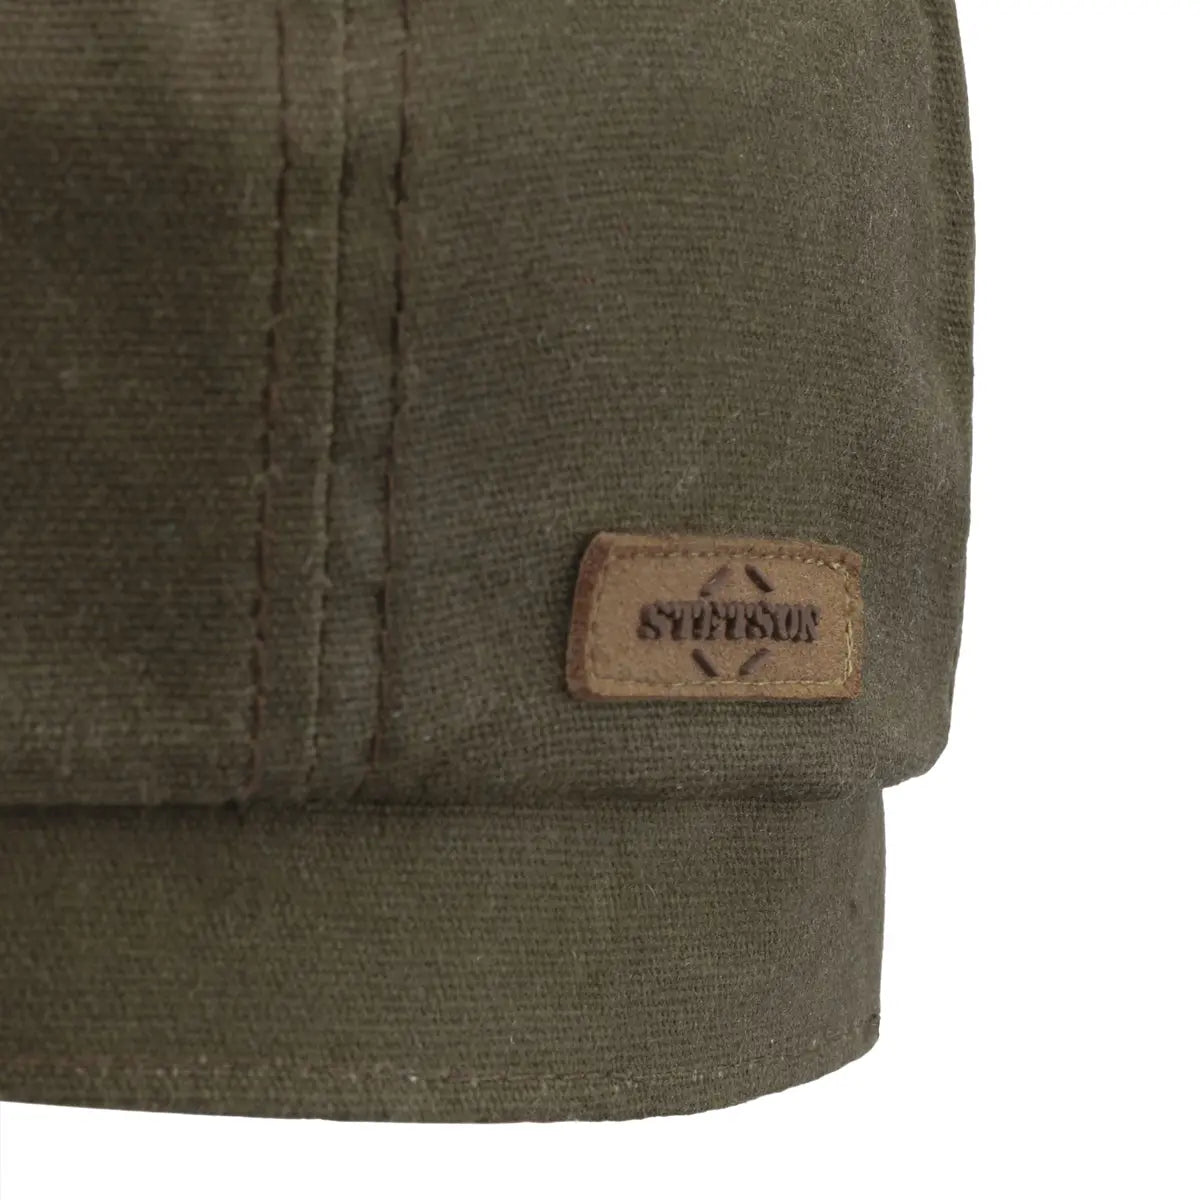 Olive Hatteras Wax Flat Cap with Ear Flaps  Stetson   